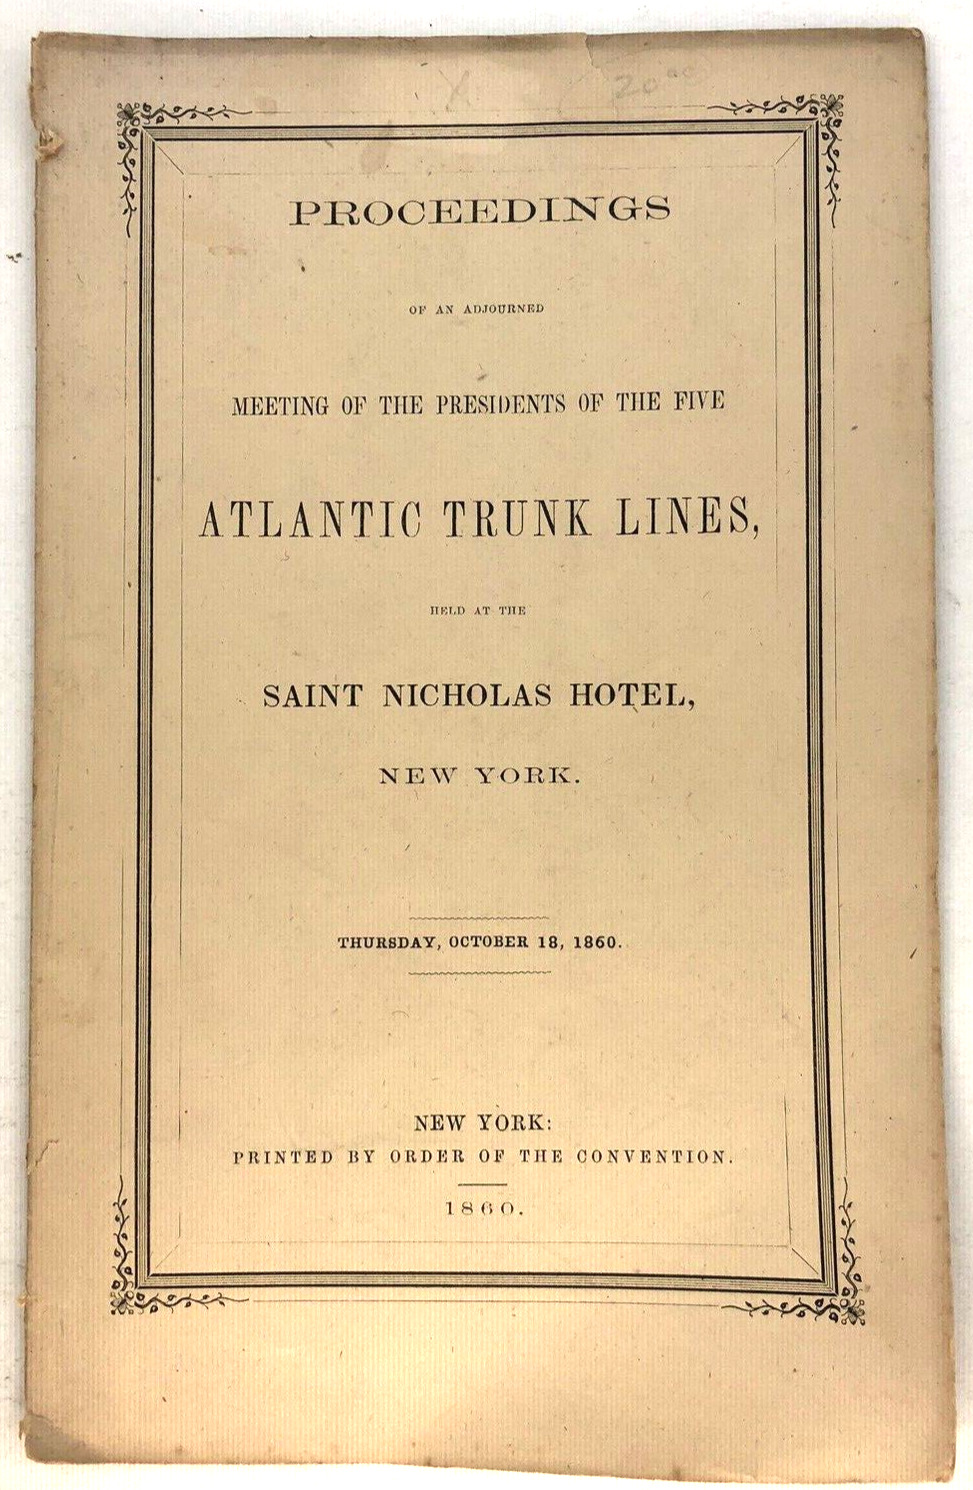 1860 Proceedings of Meeting Of The Presidents Of The Five Atlantic Trunk Lines